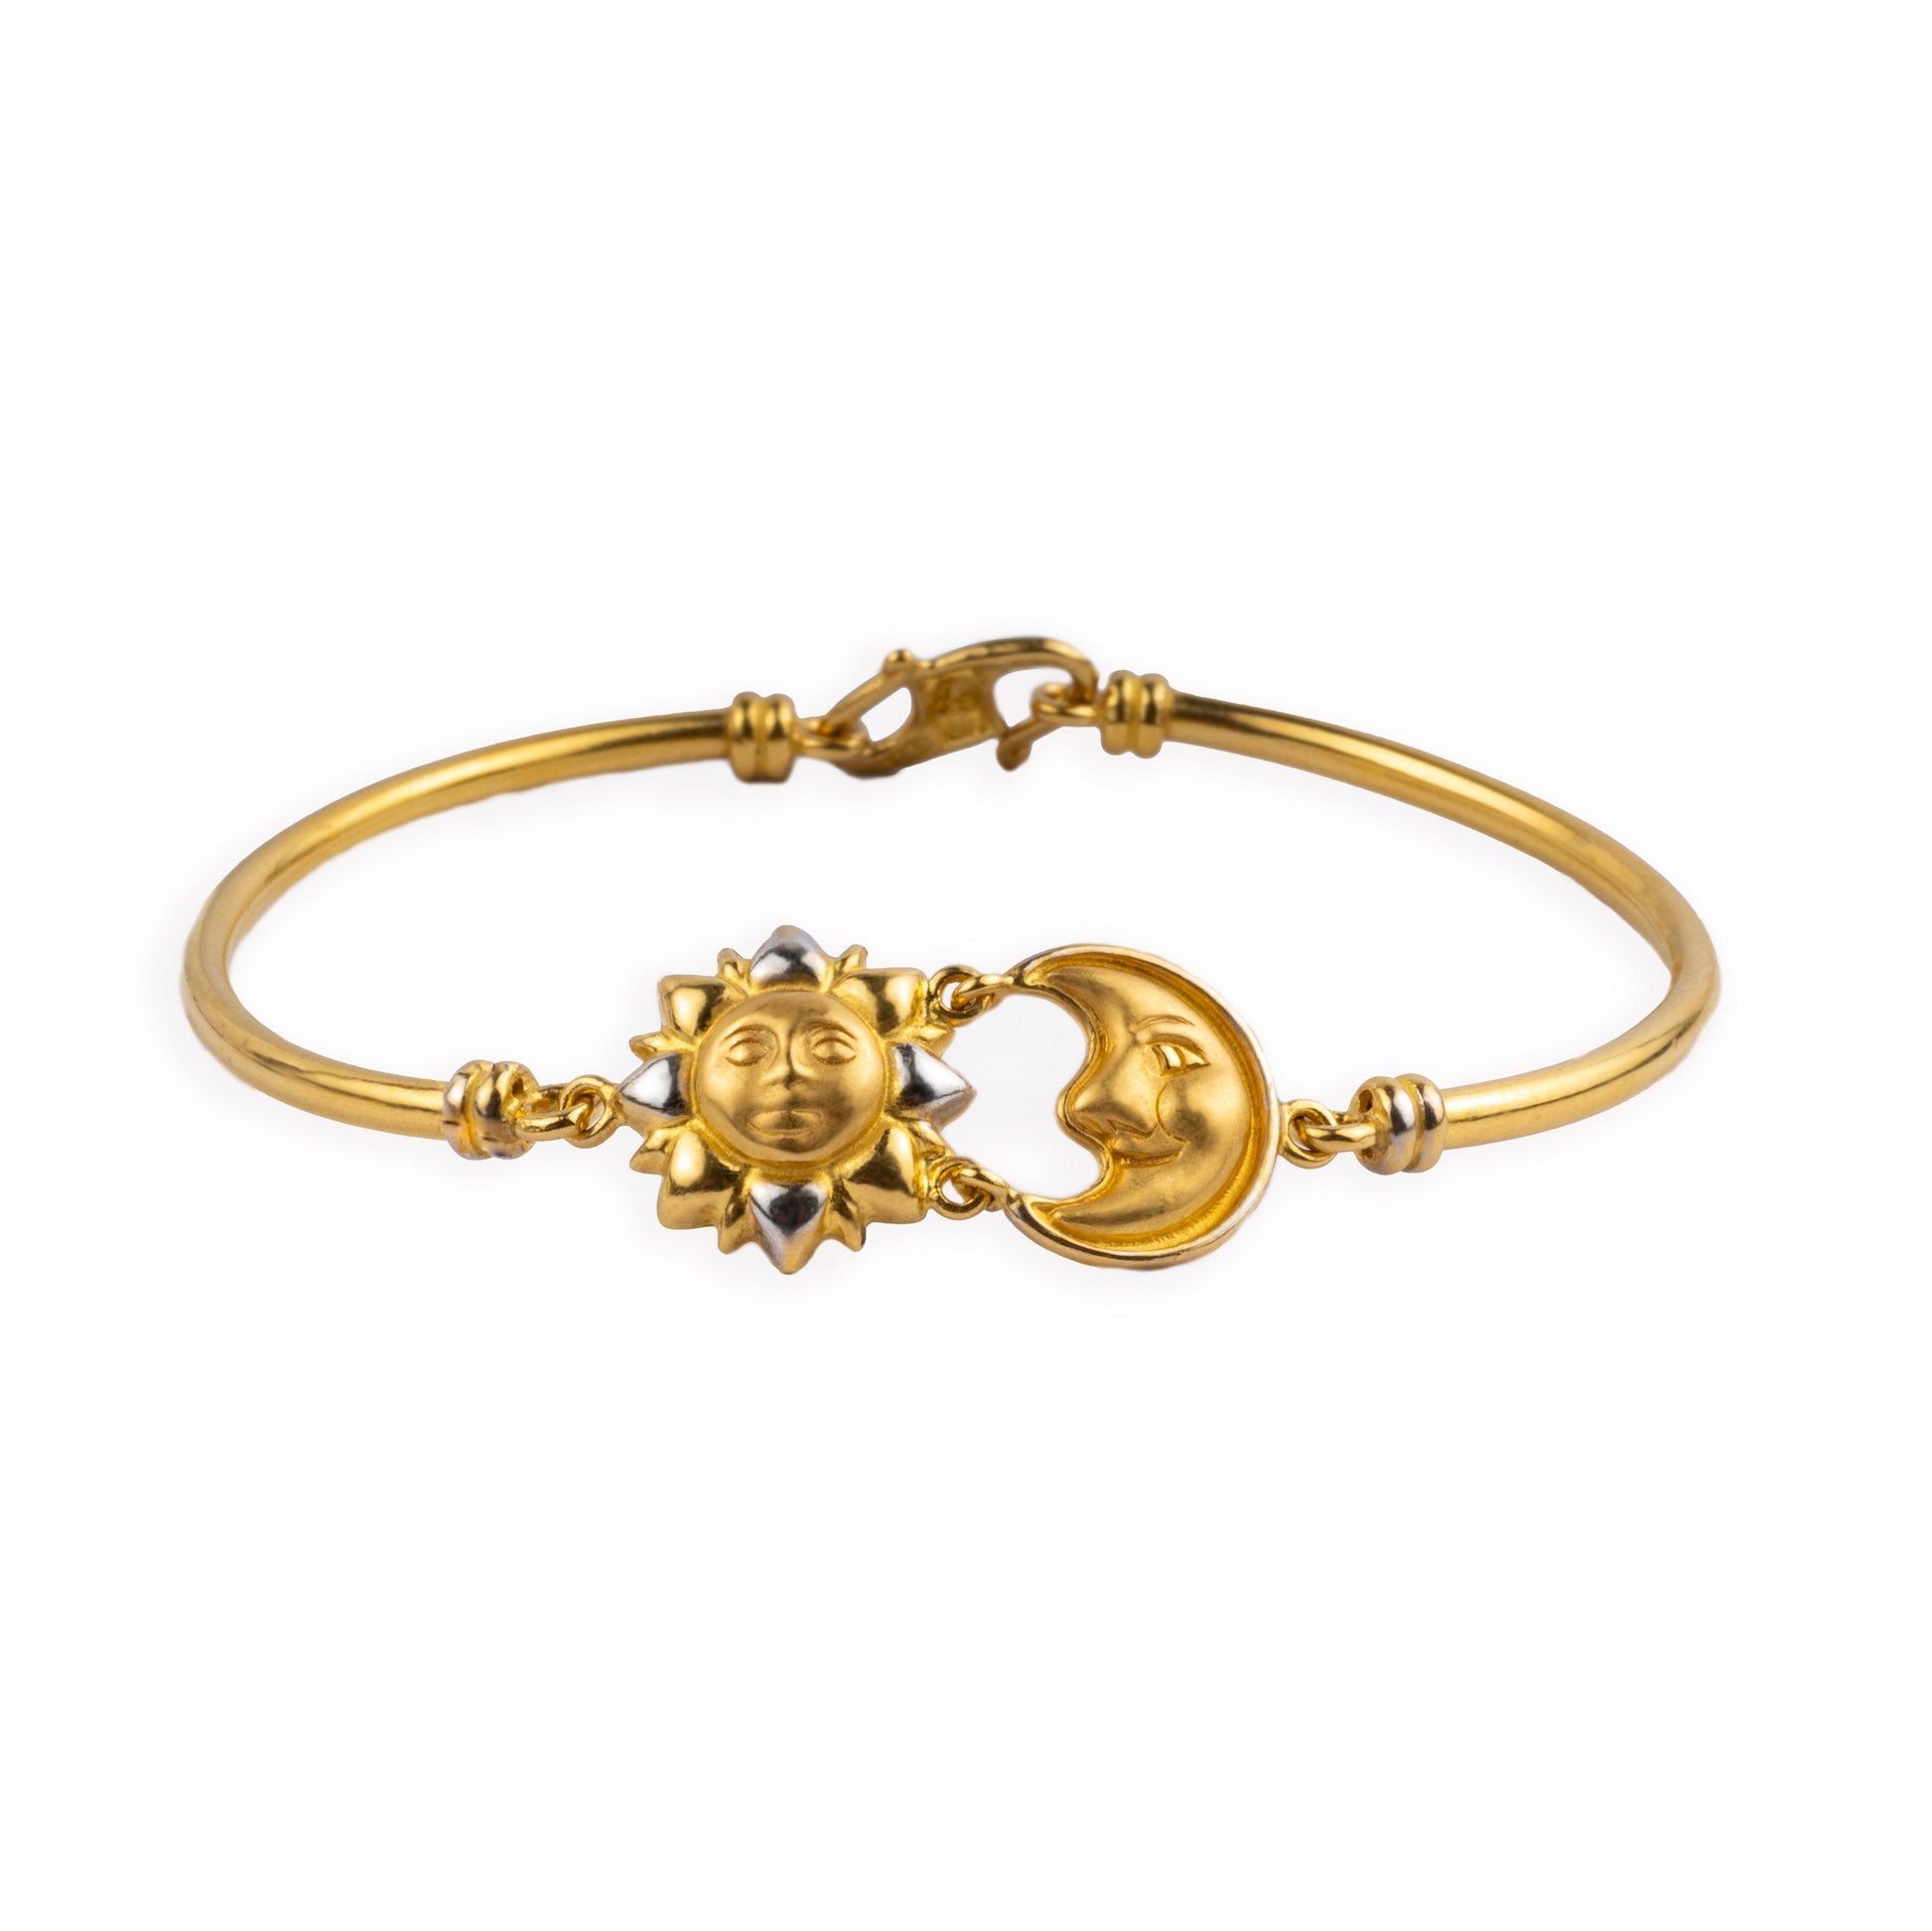 22ct Gold Hand Finished Sun & Moon Children's Bracelet with Rhodium Plating and S Clasp CBR-1389 - Minar Jewellers